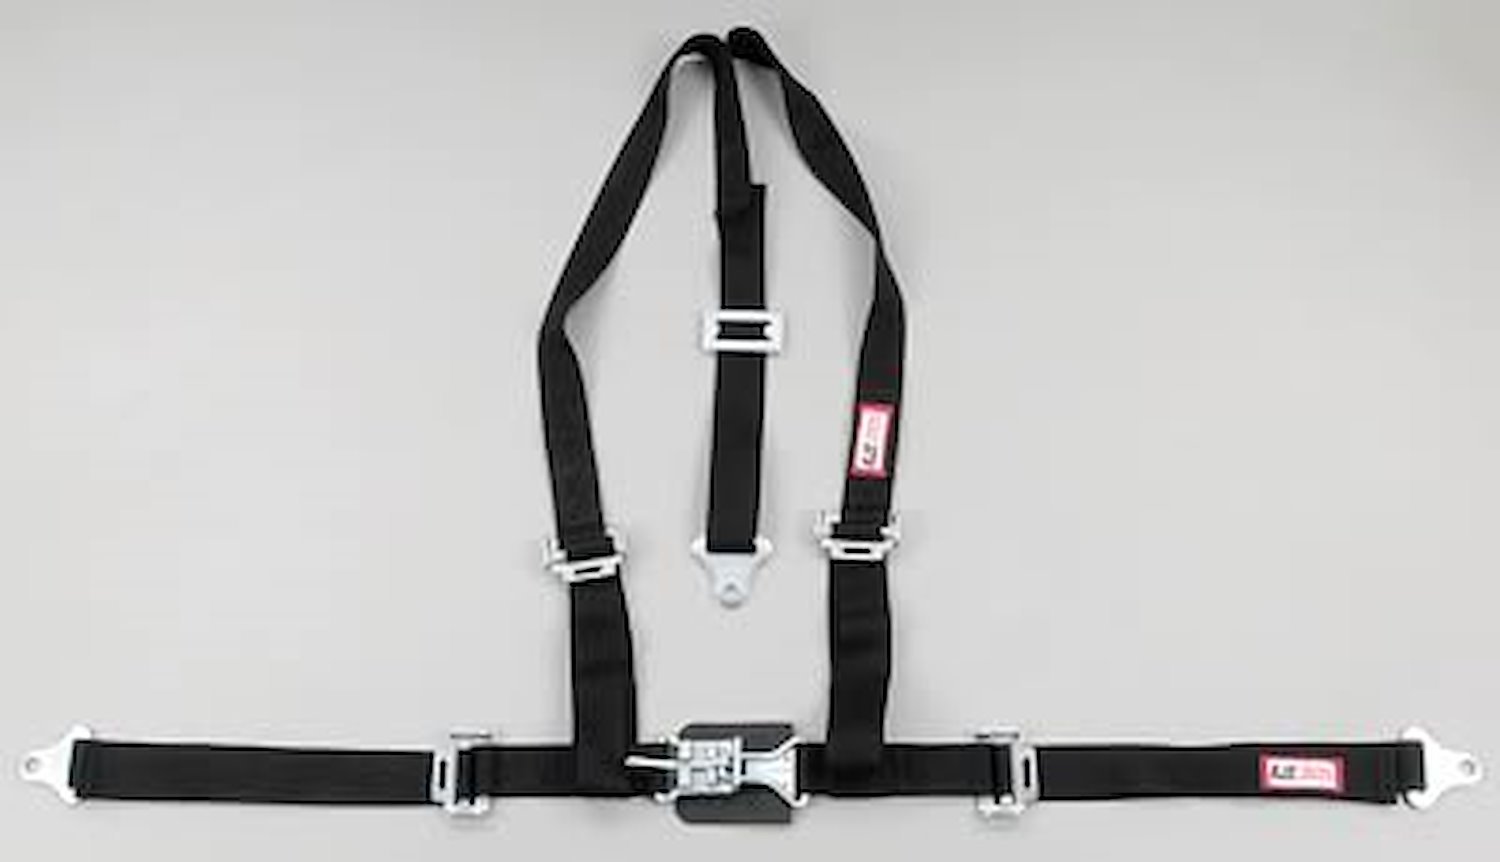 NON-SFI L&L HARNESS 2 PULL DOWN Lap Belt SEWN IN 2 S.H. Y FLOOR Mount ALL WRAP ENDS RED